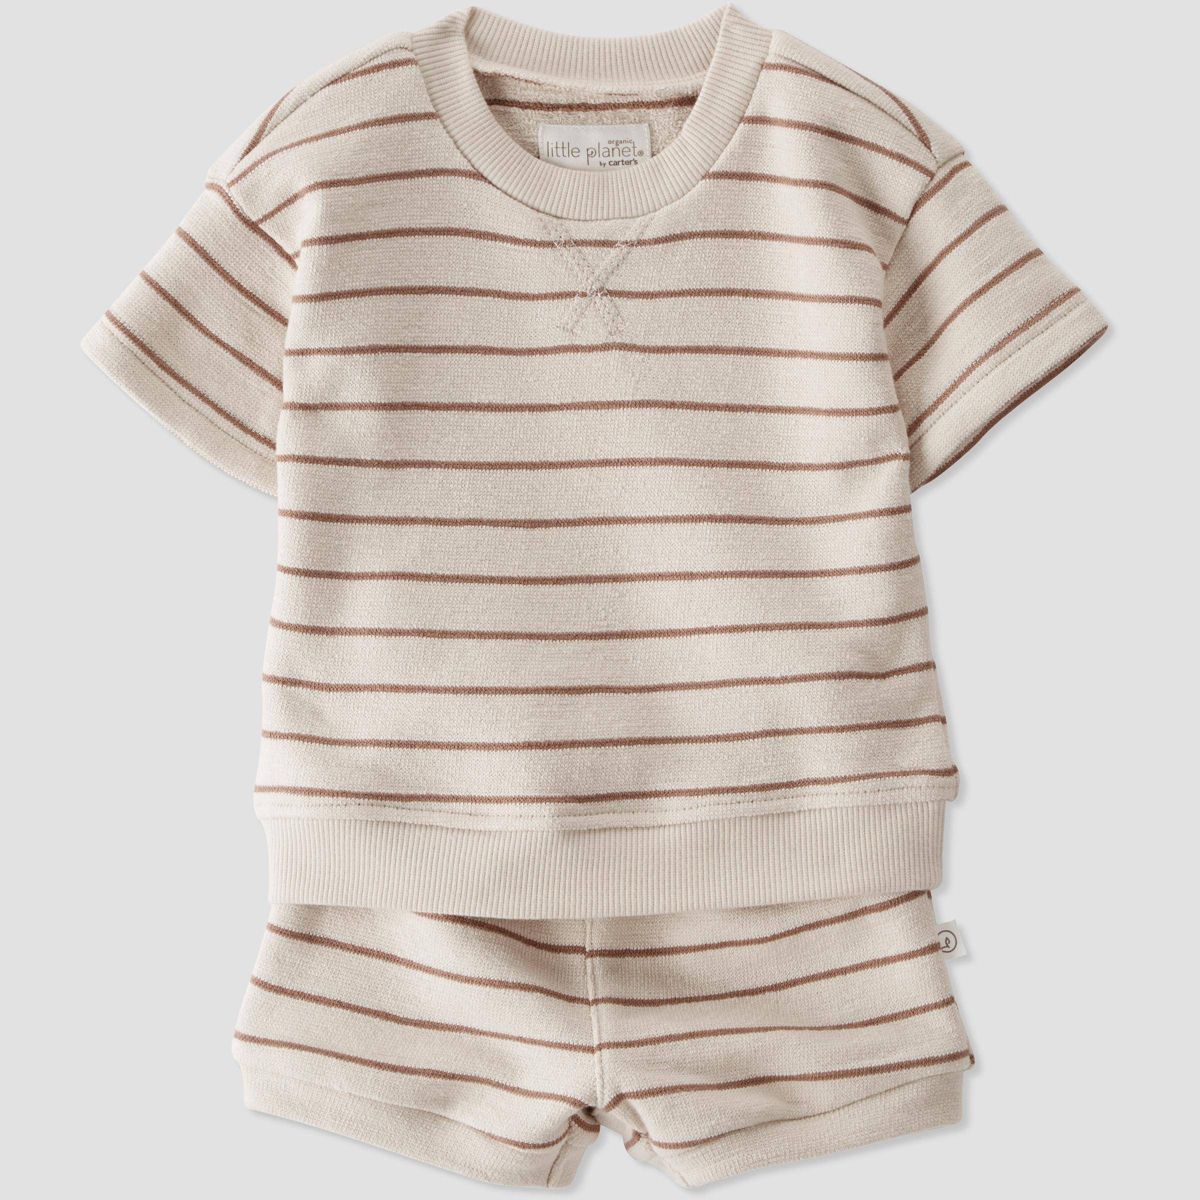 Little Planet by Carter’s Organic Baby 2pc Striped Shorts Set - Brown 12M | Target